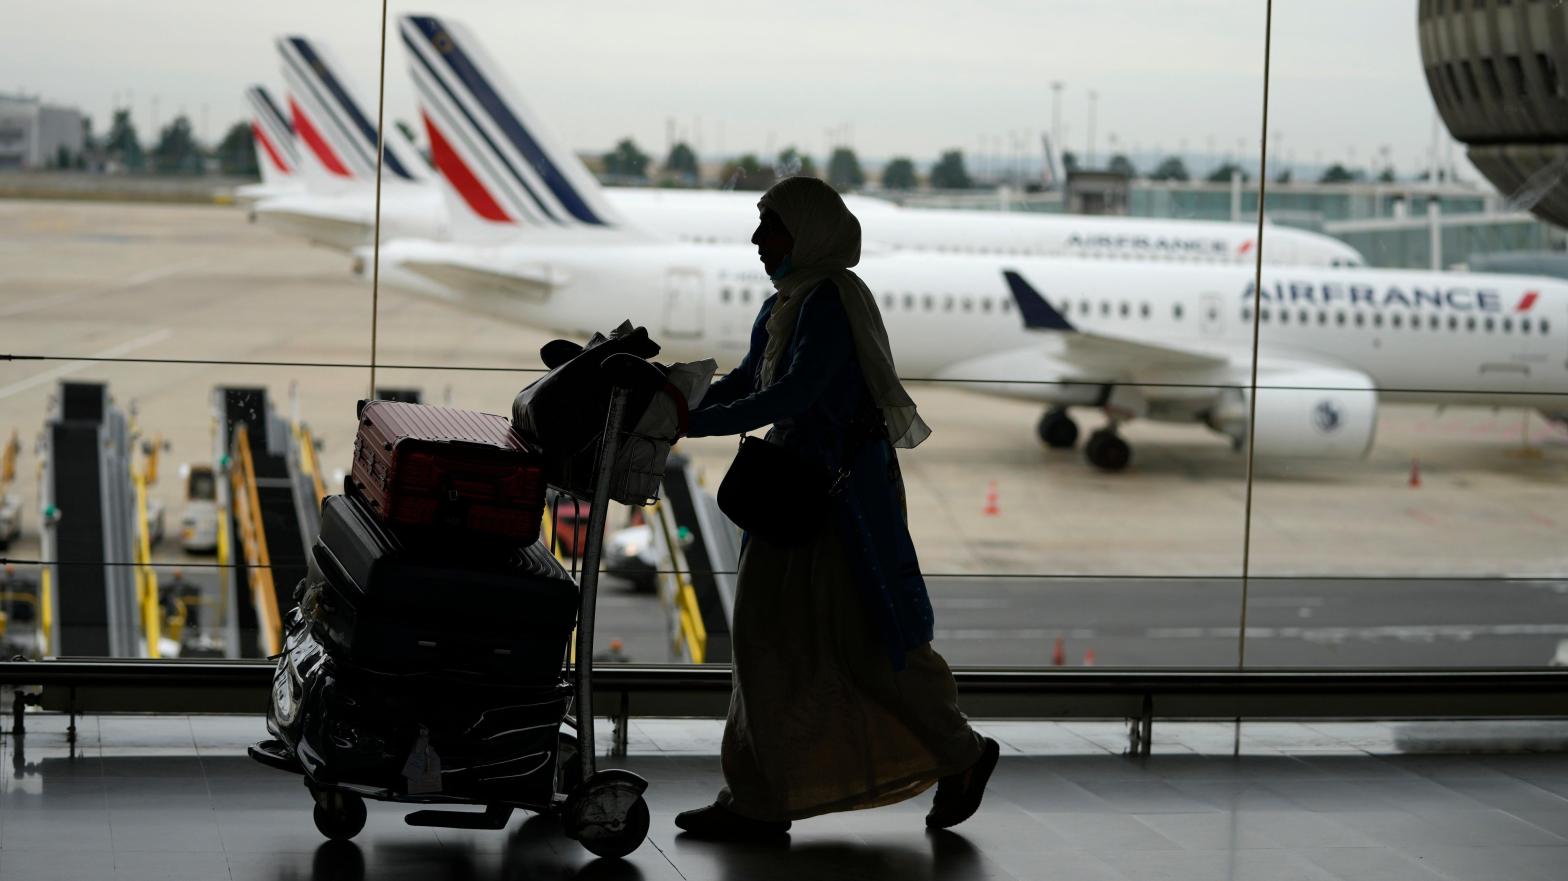 A traveller pulls her trolley Friday, Sept. 16, 2022 at Roissy Charles de Gaulle airport, north of Paris. (Photo: Francois Mori, AP)